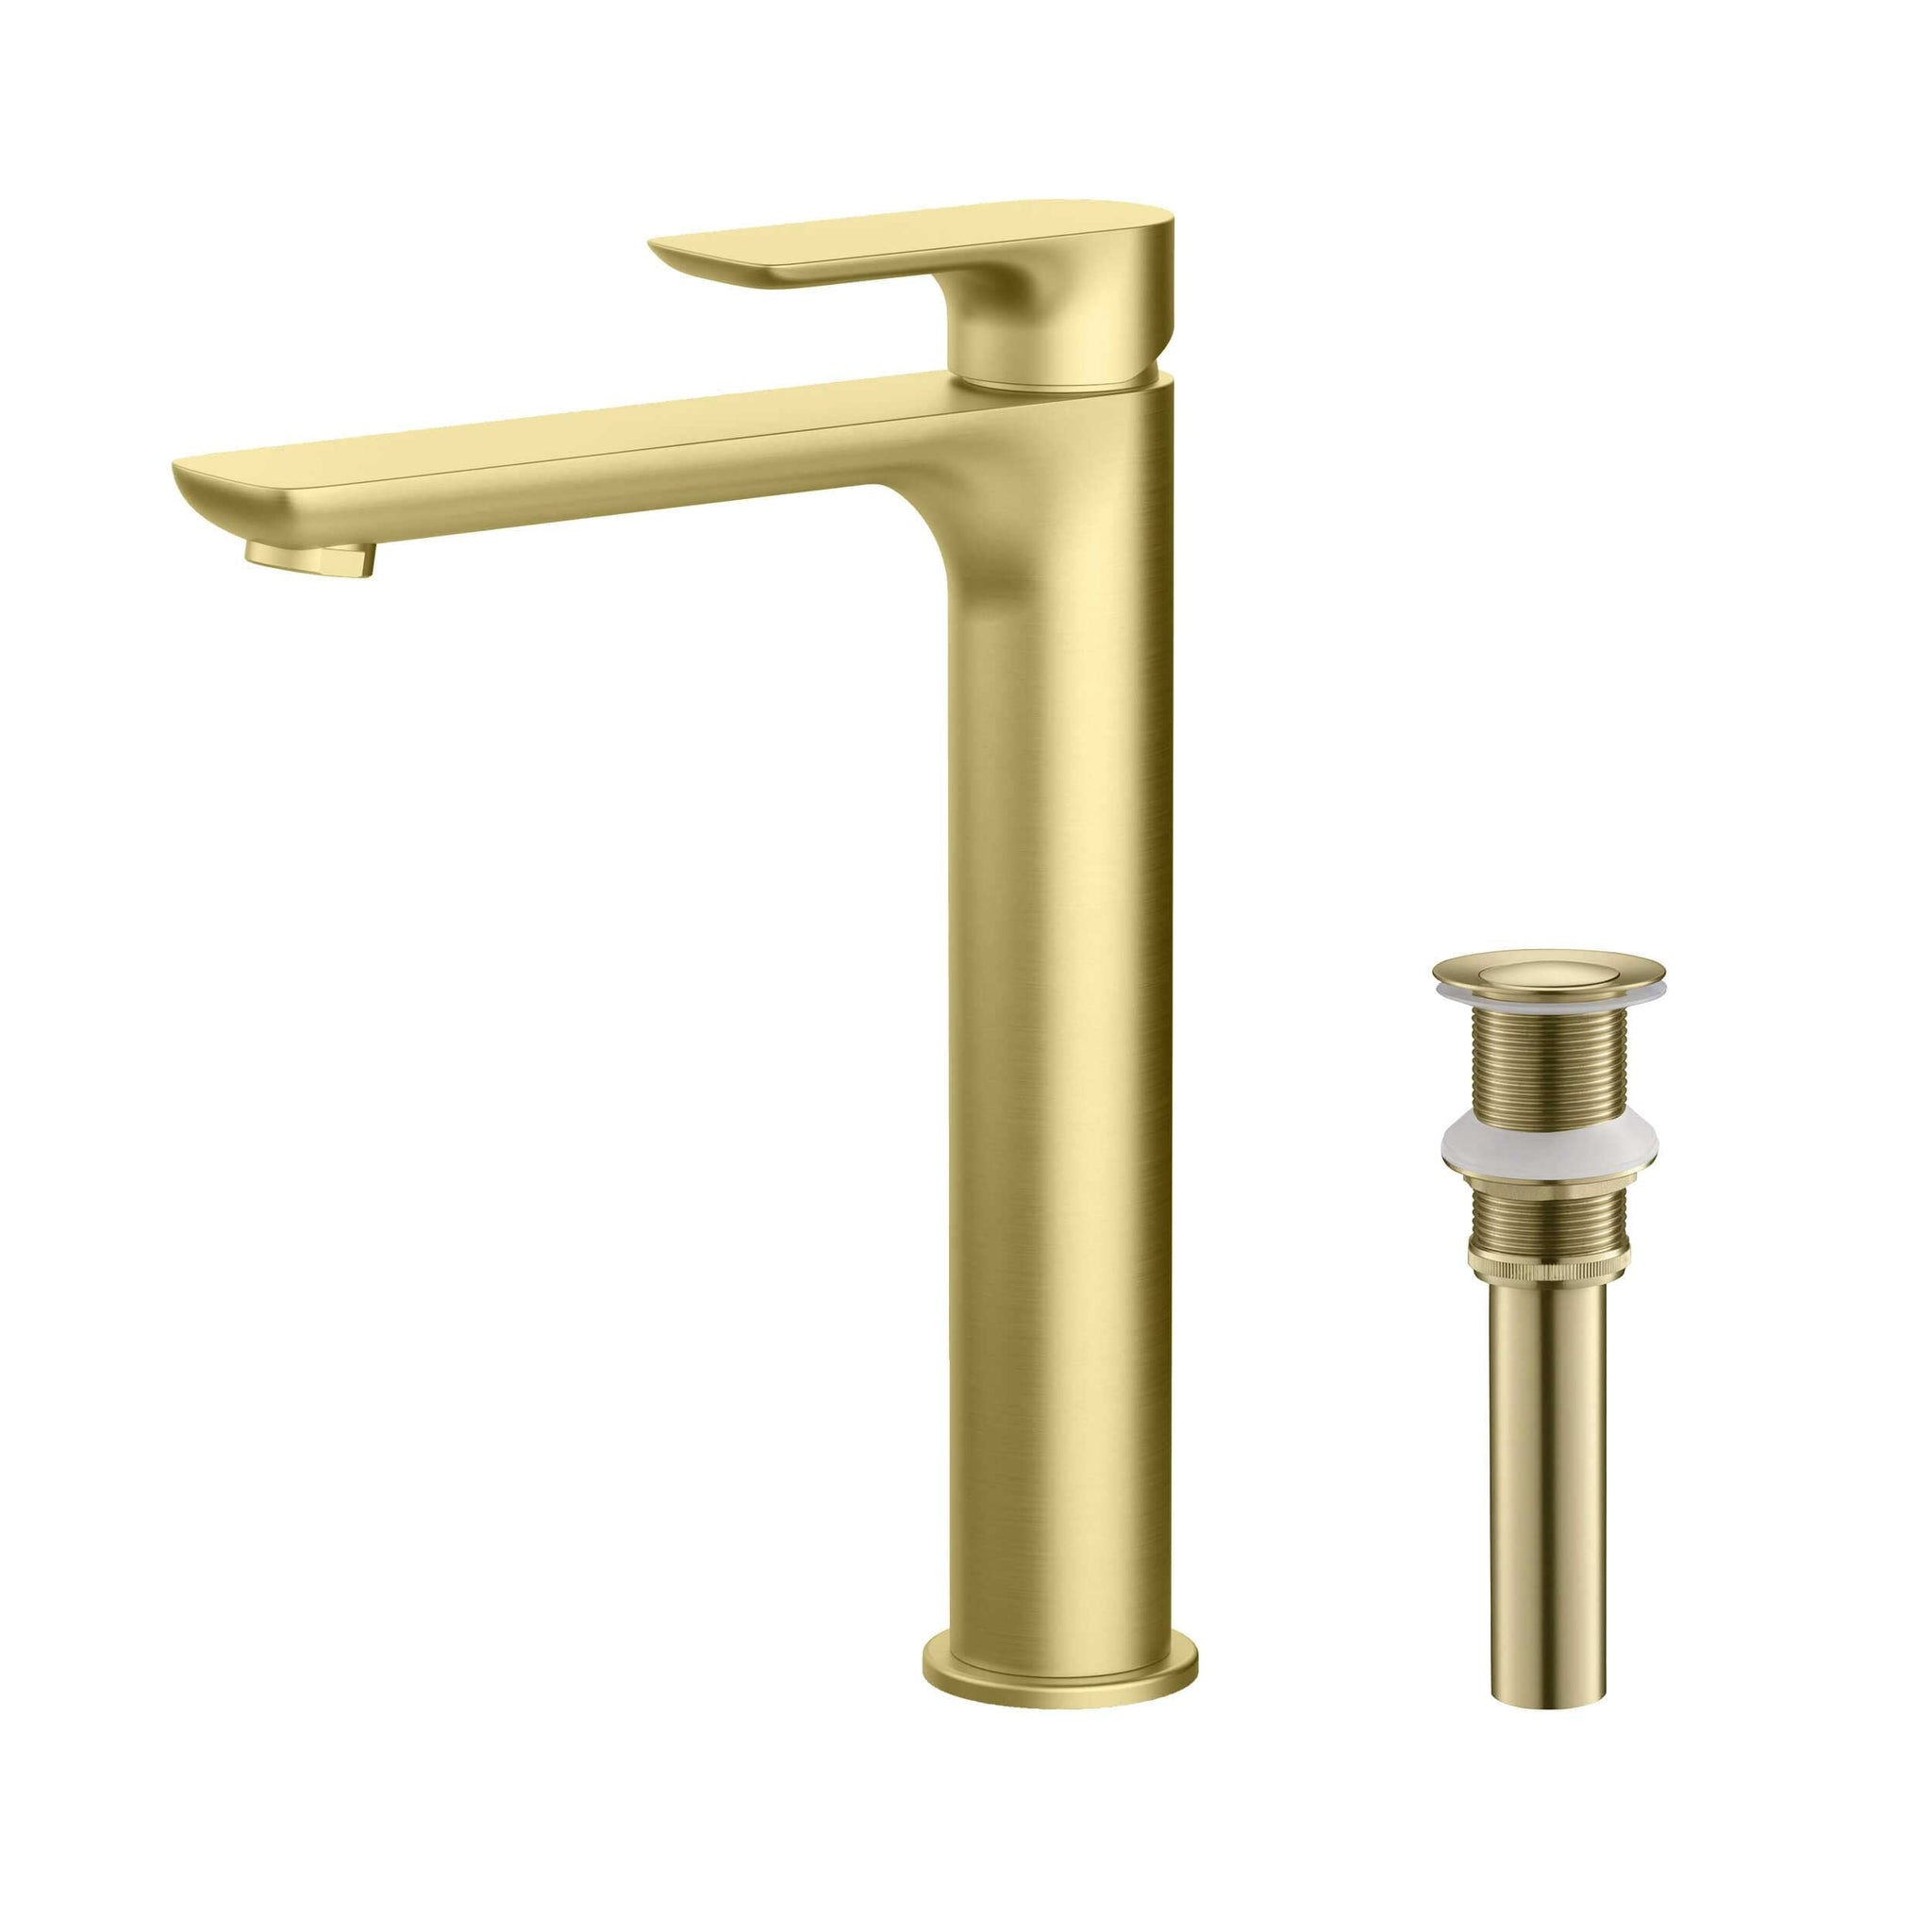 KIBI, KIBI Tender-T Single Handle Brushed Gold Solid Brass Bathroom Vessel Sink Faucet With Pop-Up Drain Stopper Small Cover Without Overflow